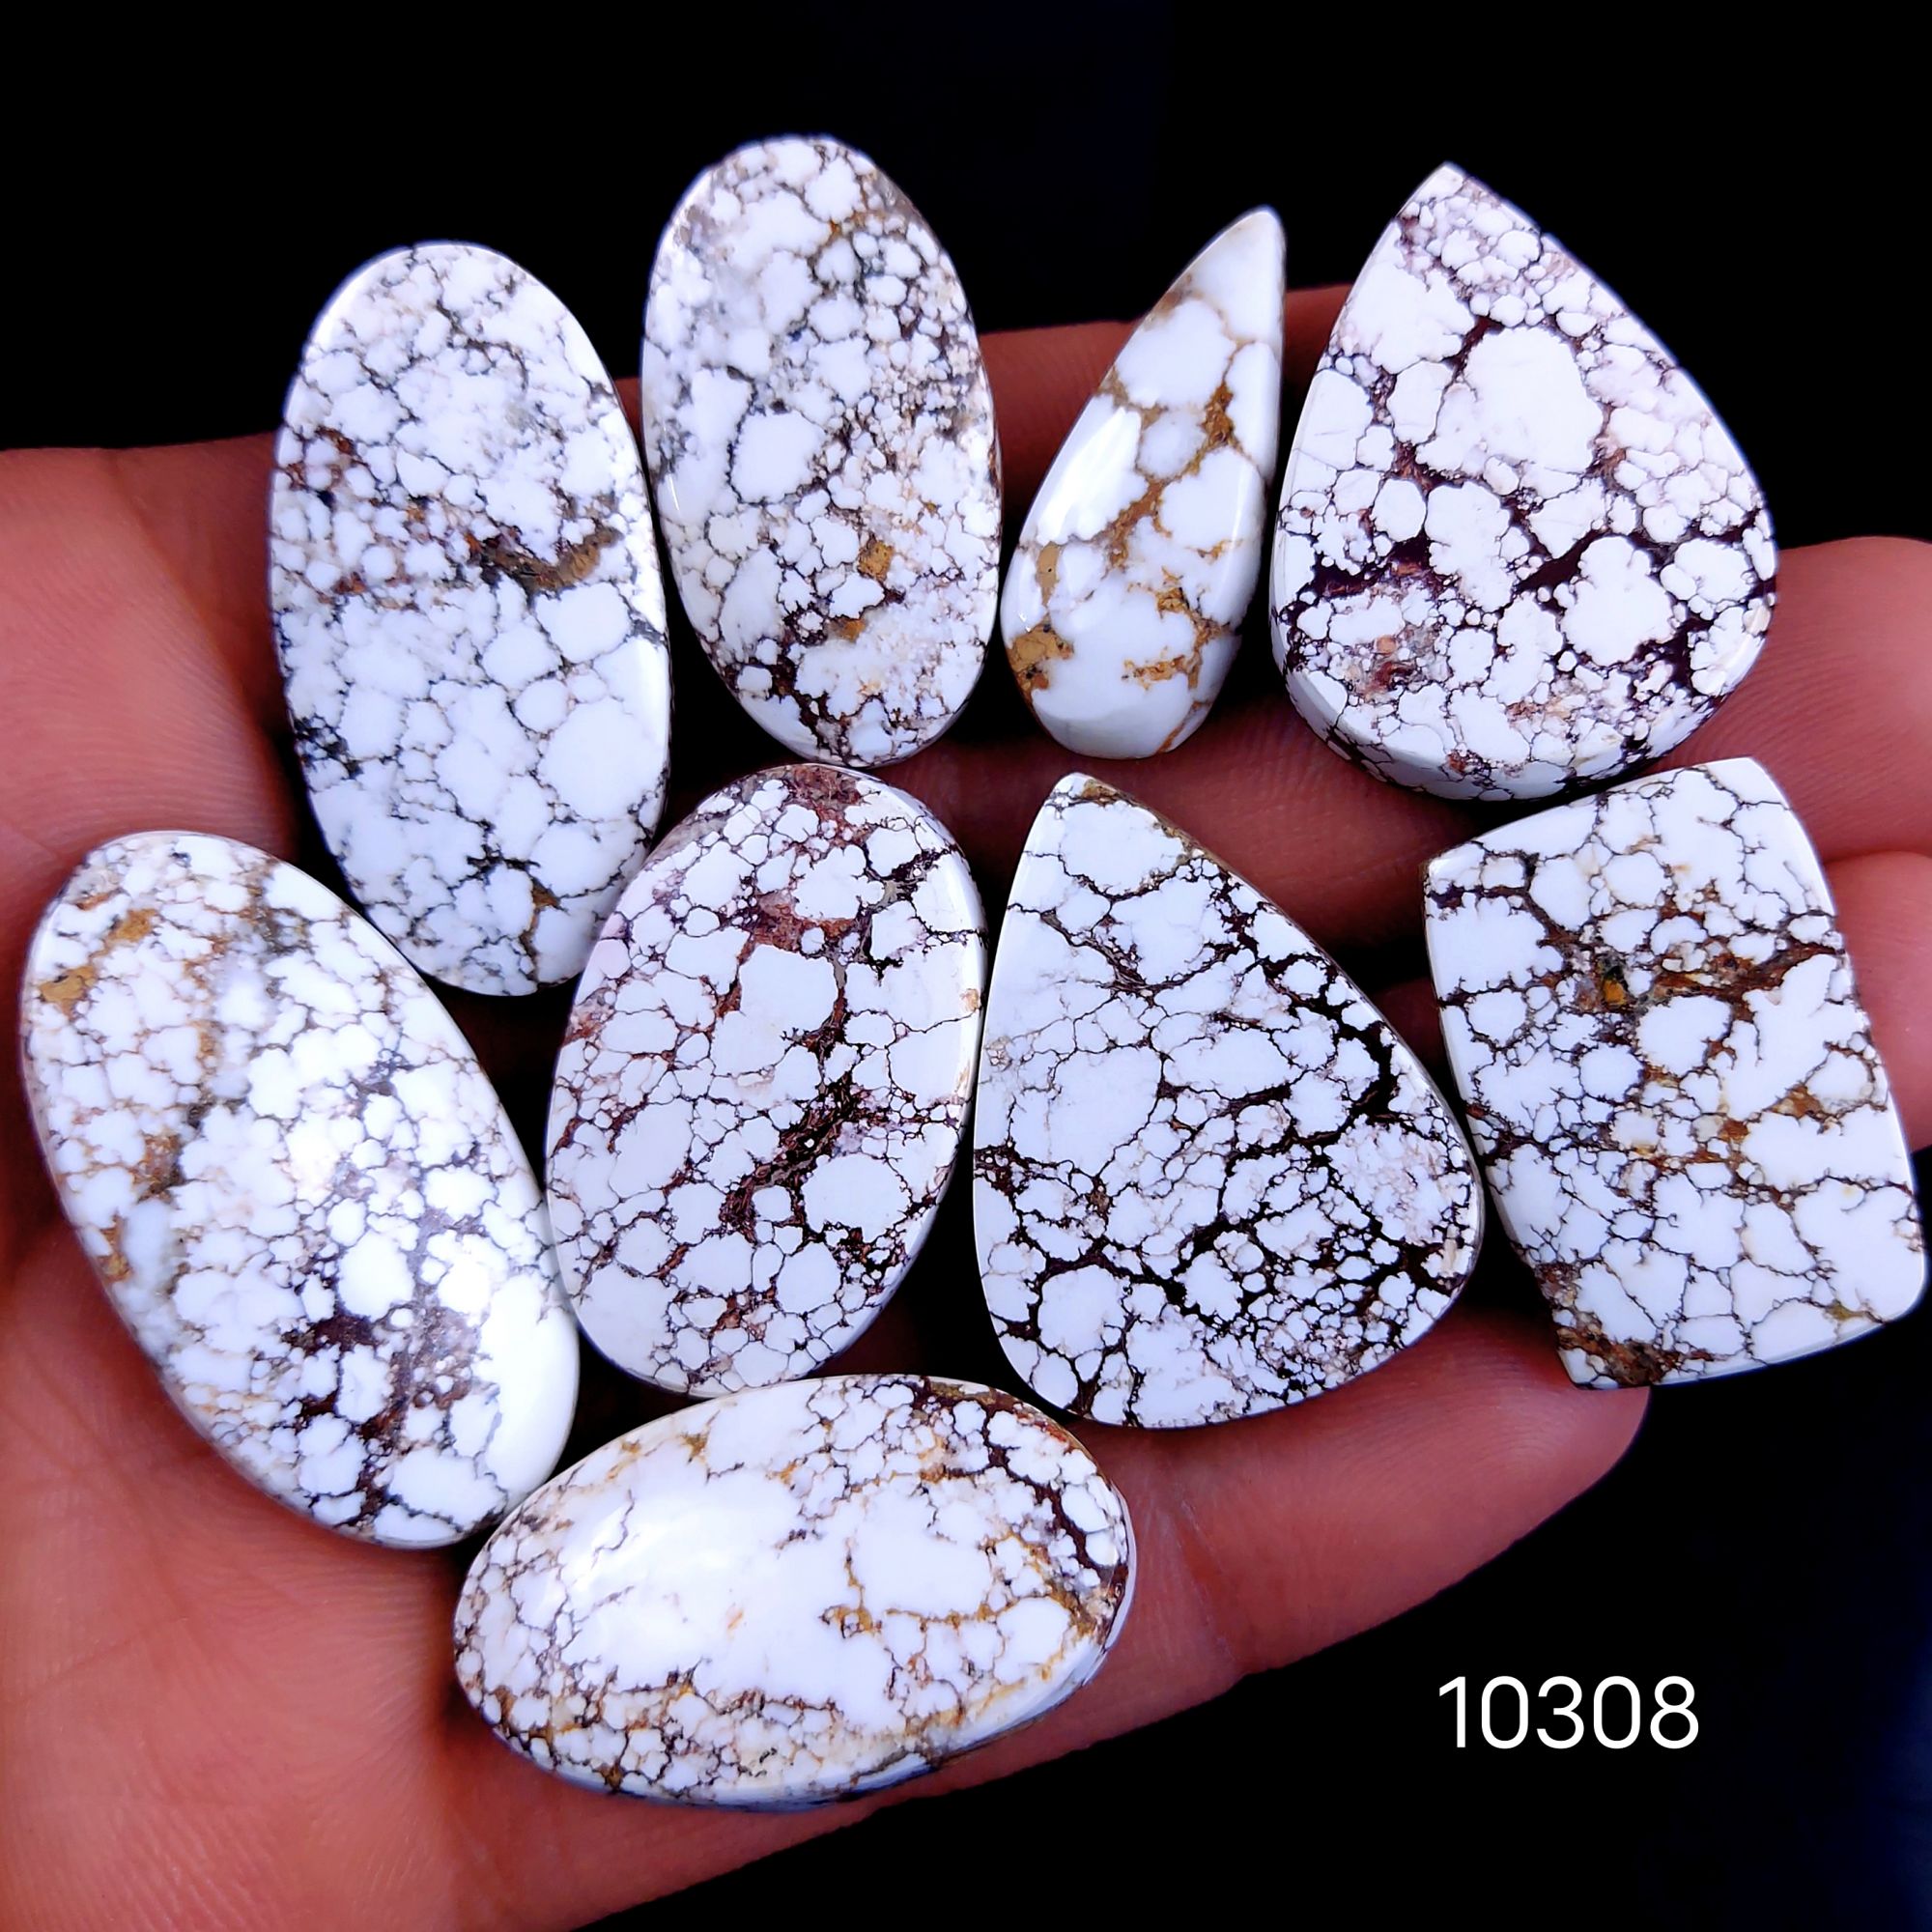 9Pc 268Cts Natural Wild Horse Magnesite Turquoise Cabochon Polished Loose Gemstone Flat Back Multi Jewelry Making Crystal  36x19 28x12mm #10308